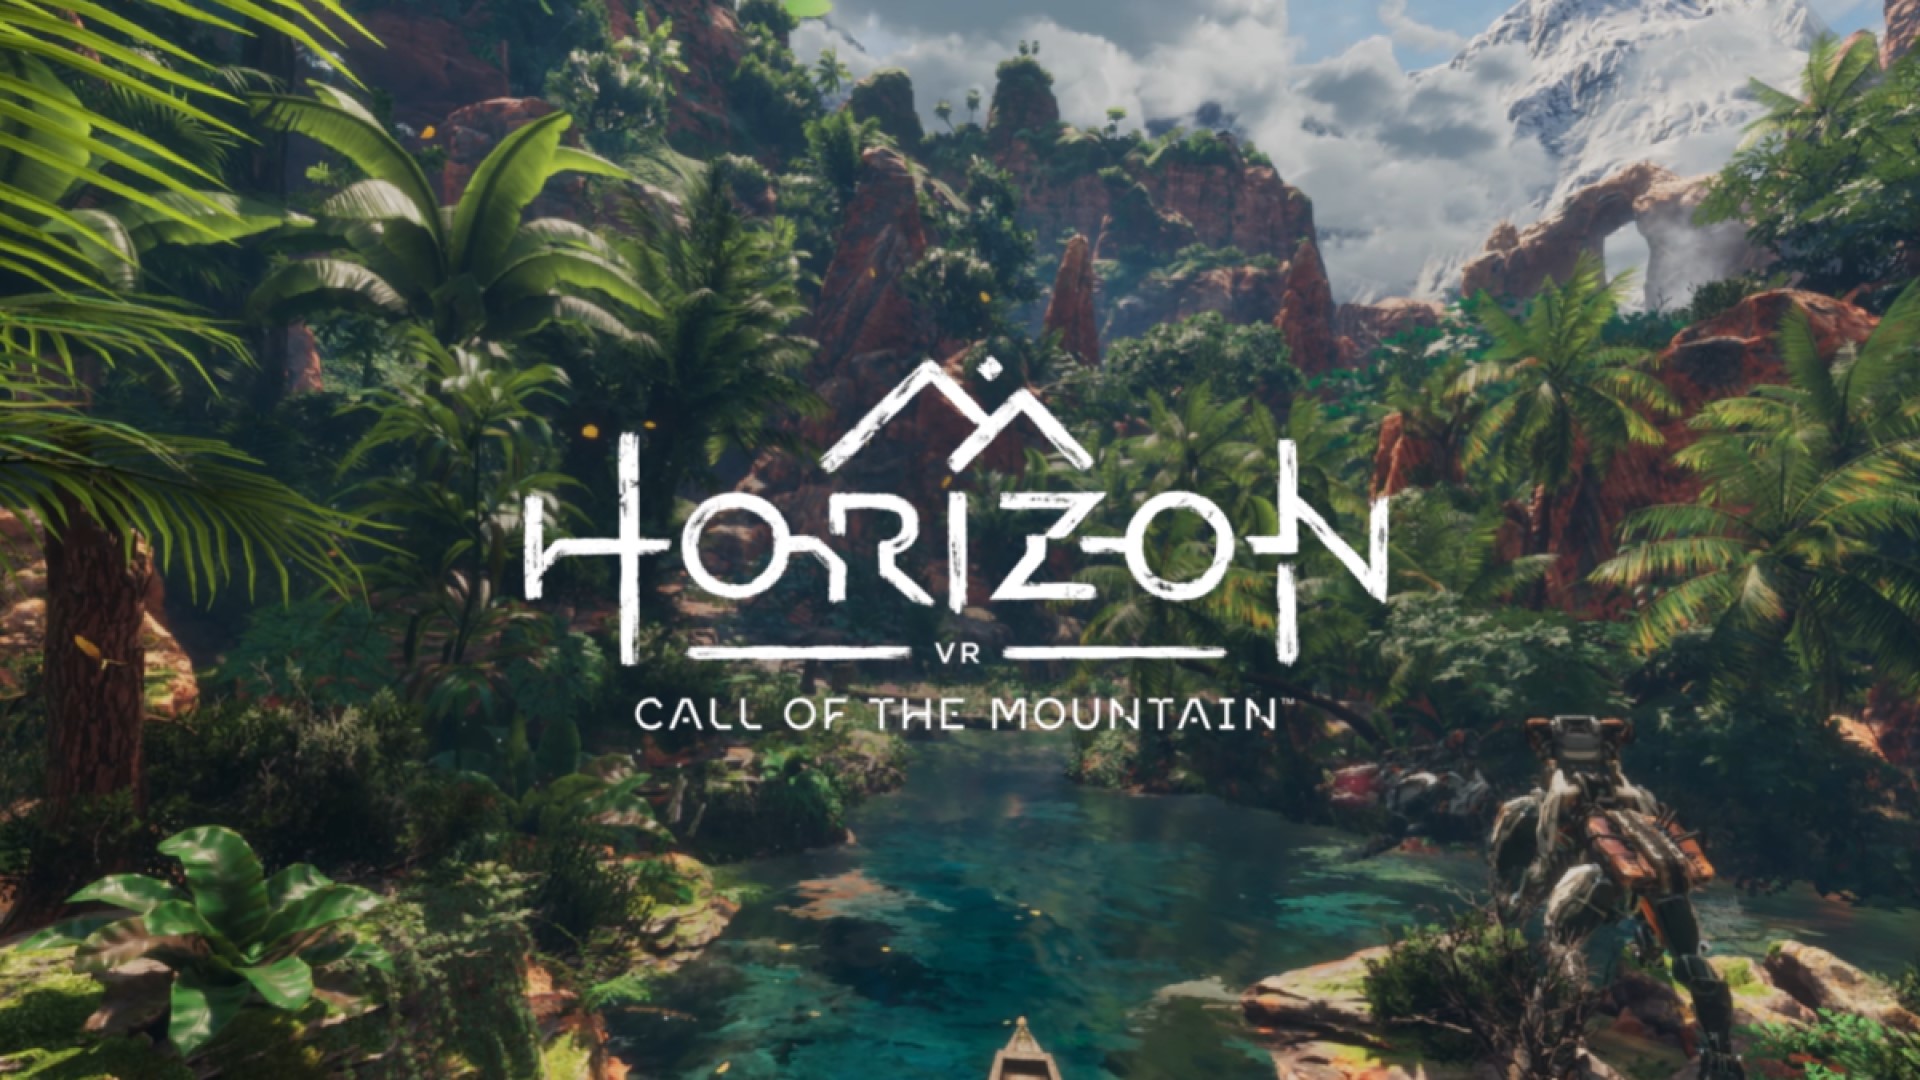 Horizon Call of the Mountain Launch Trailer Showcases
Climbing, Intense Machine Fights, and More